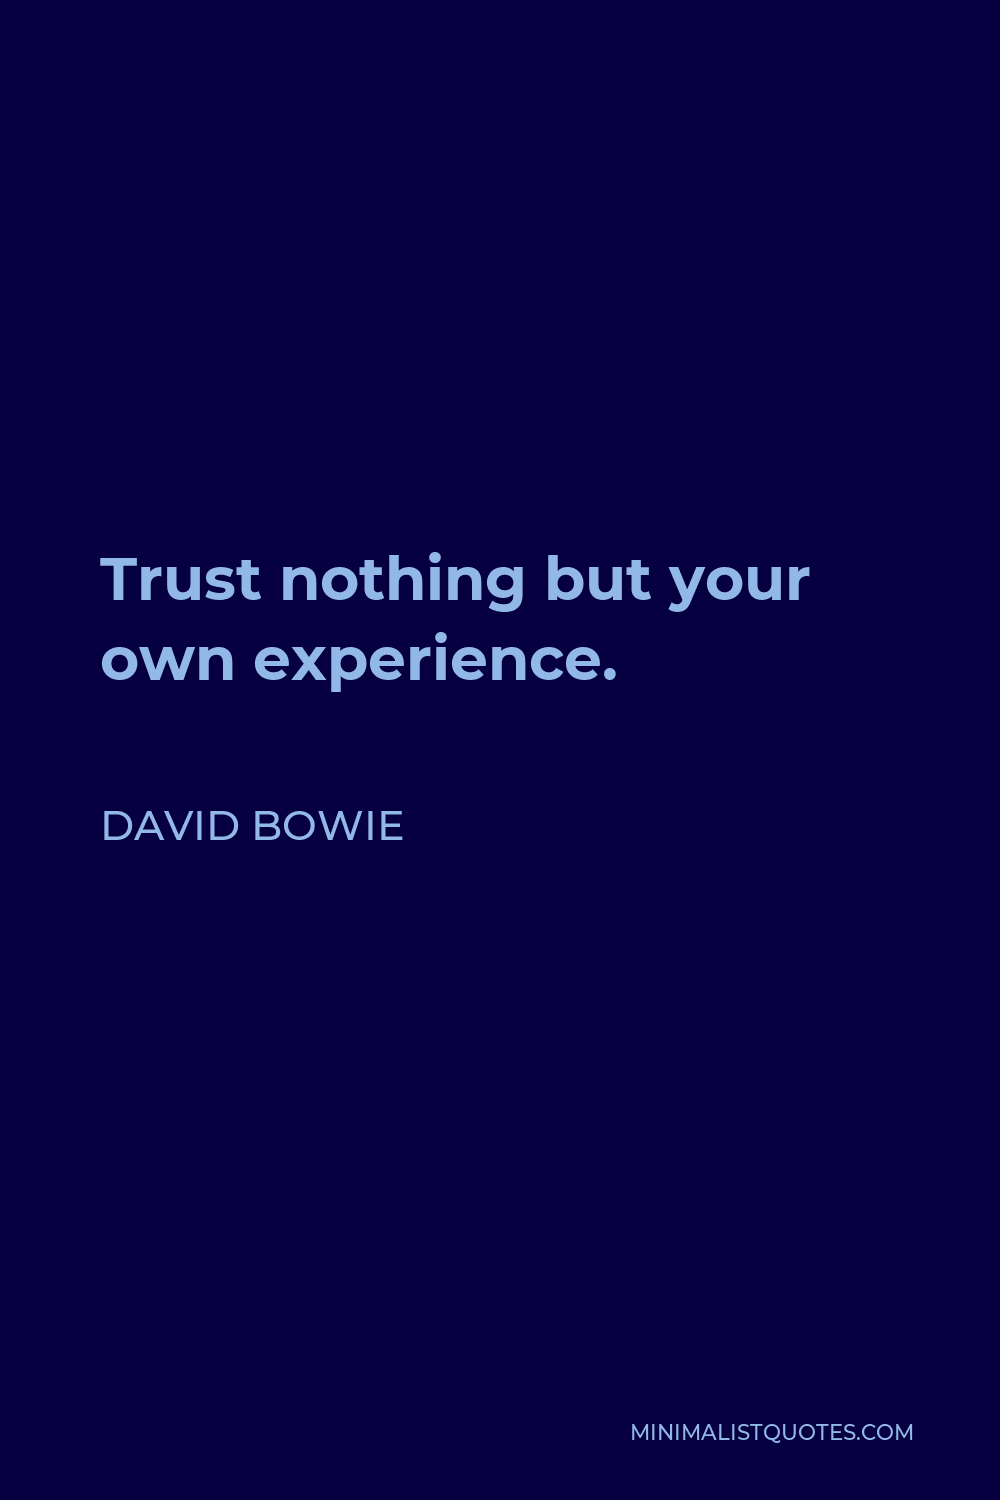 David Bowie Quote - Trust nothing but your own experience.